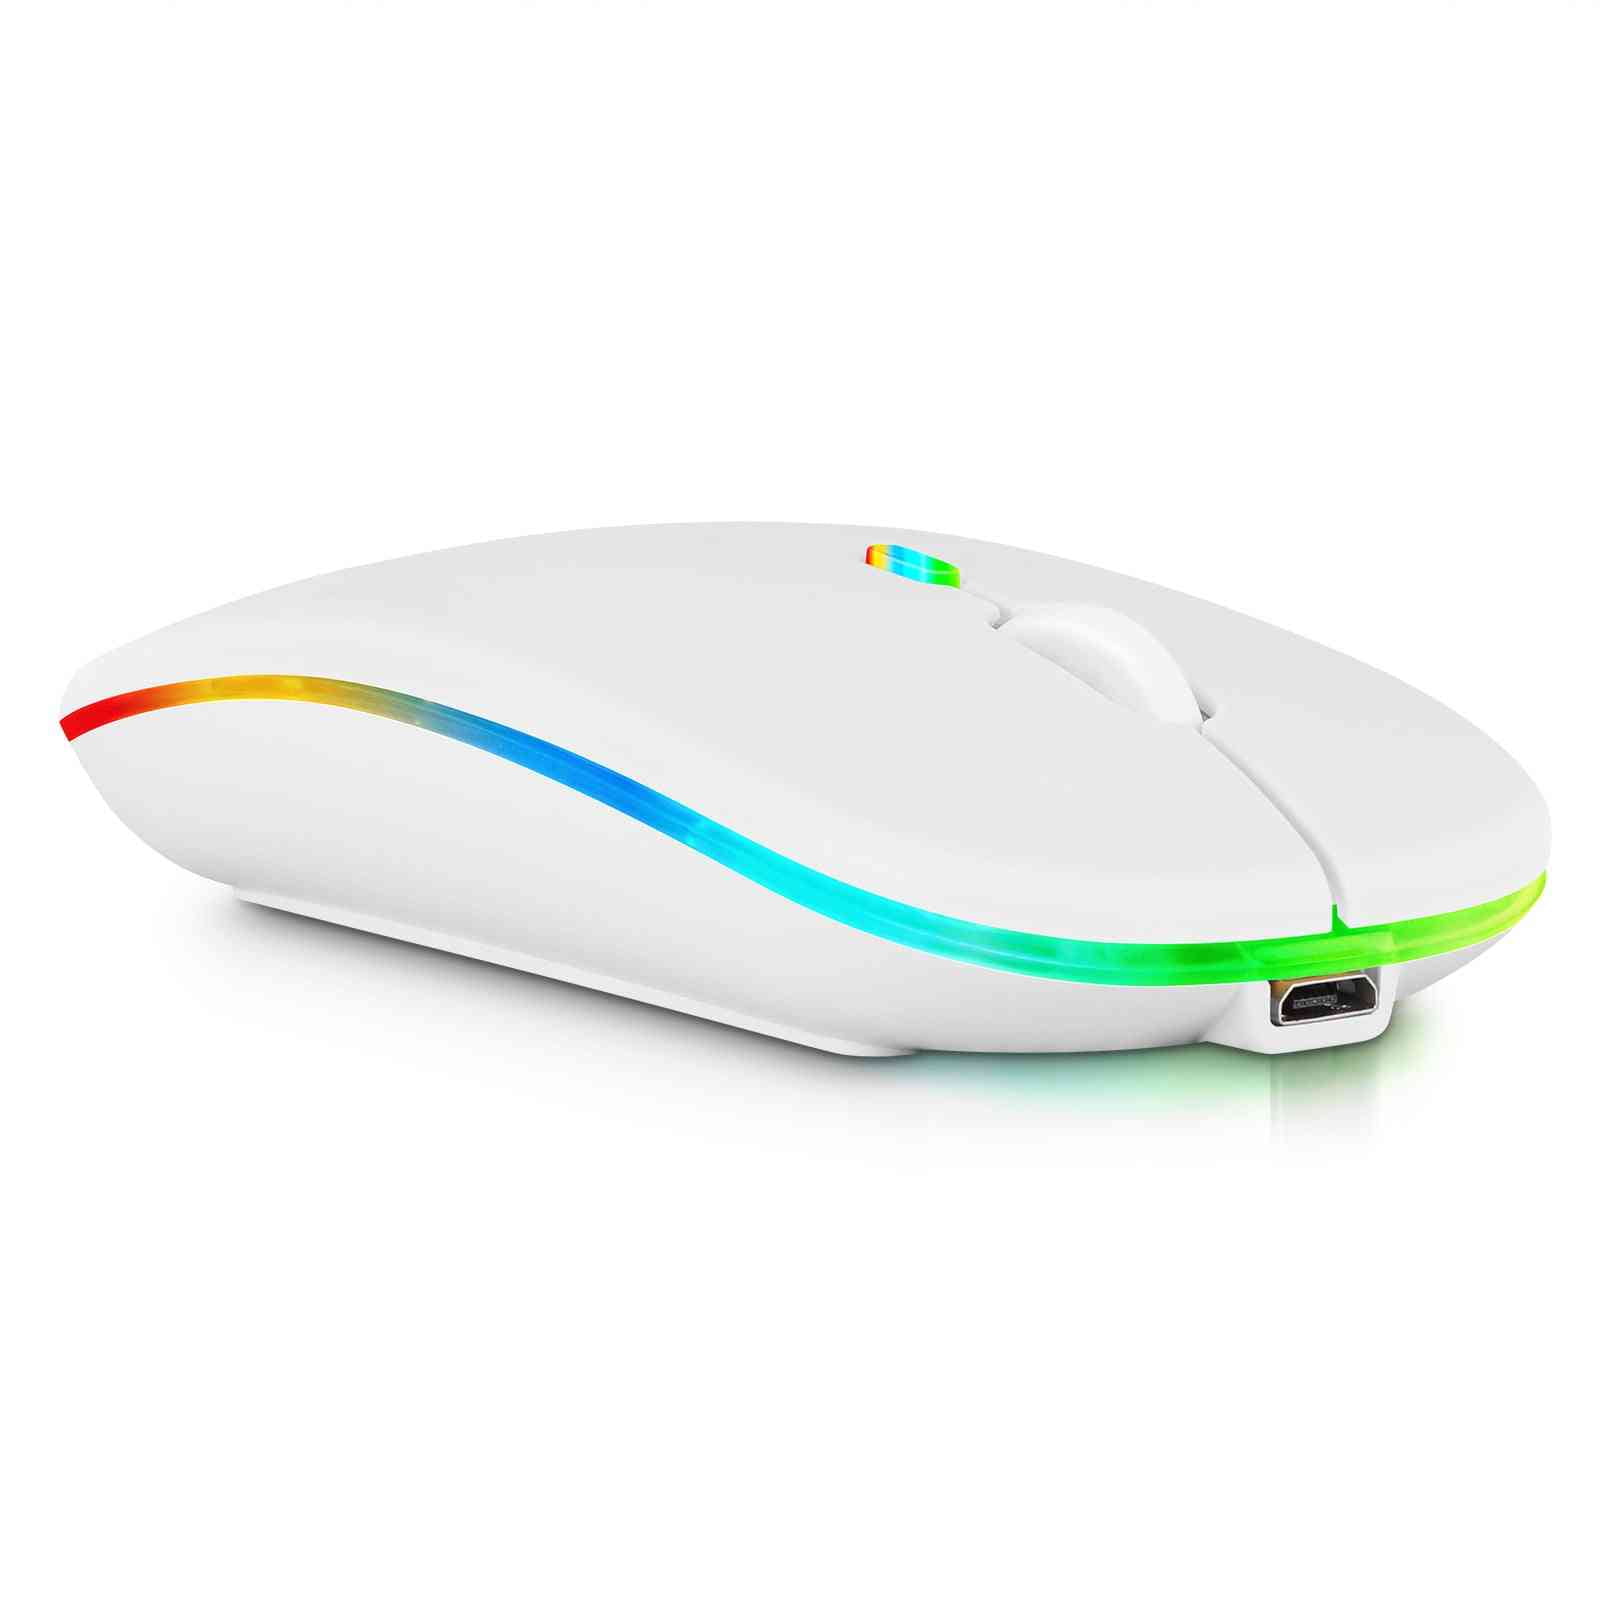 2.4GHz & Bluetooth Mouse, Rechargeable Wireless Mouse for Philips PH1 Bluetooth Wireless Mouse for Laptop / PC / Mac / Computer / Tablet / Android RGB LED Pure White Walmart.com